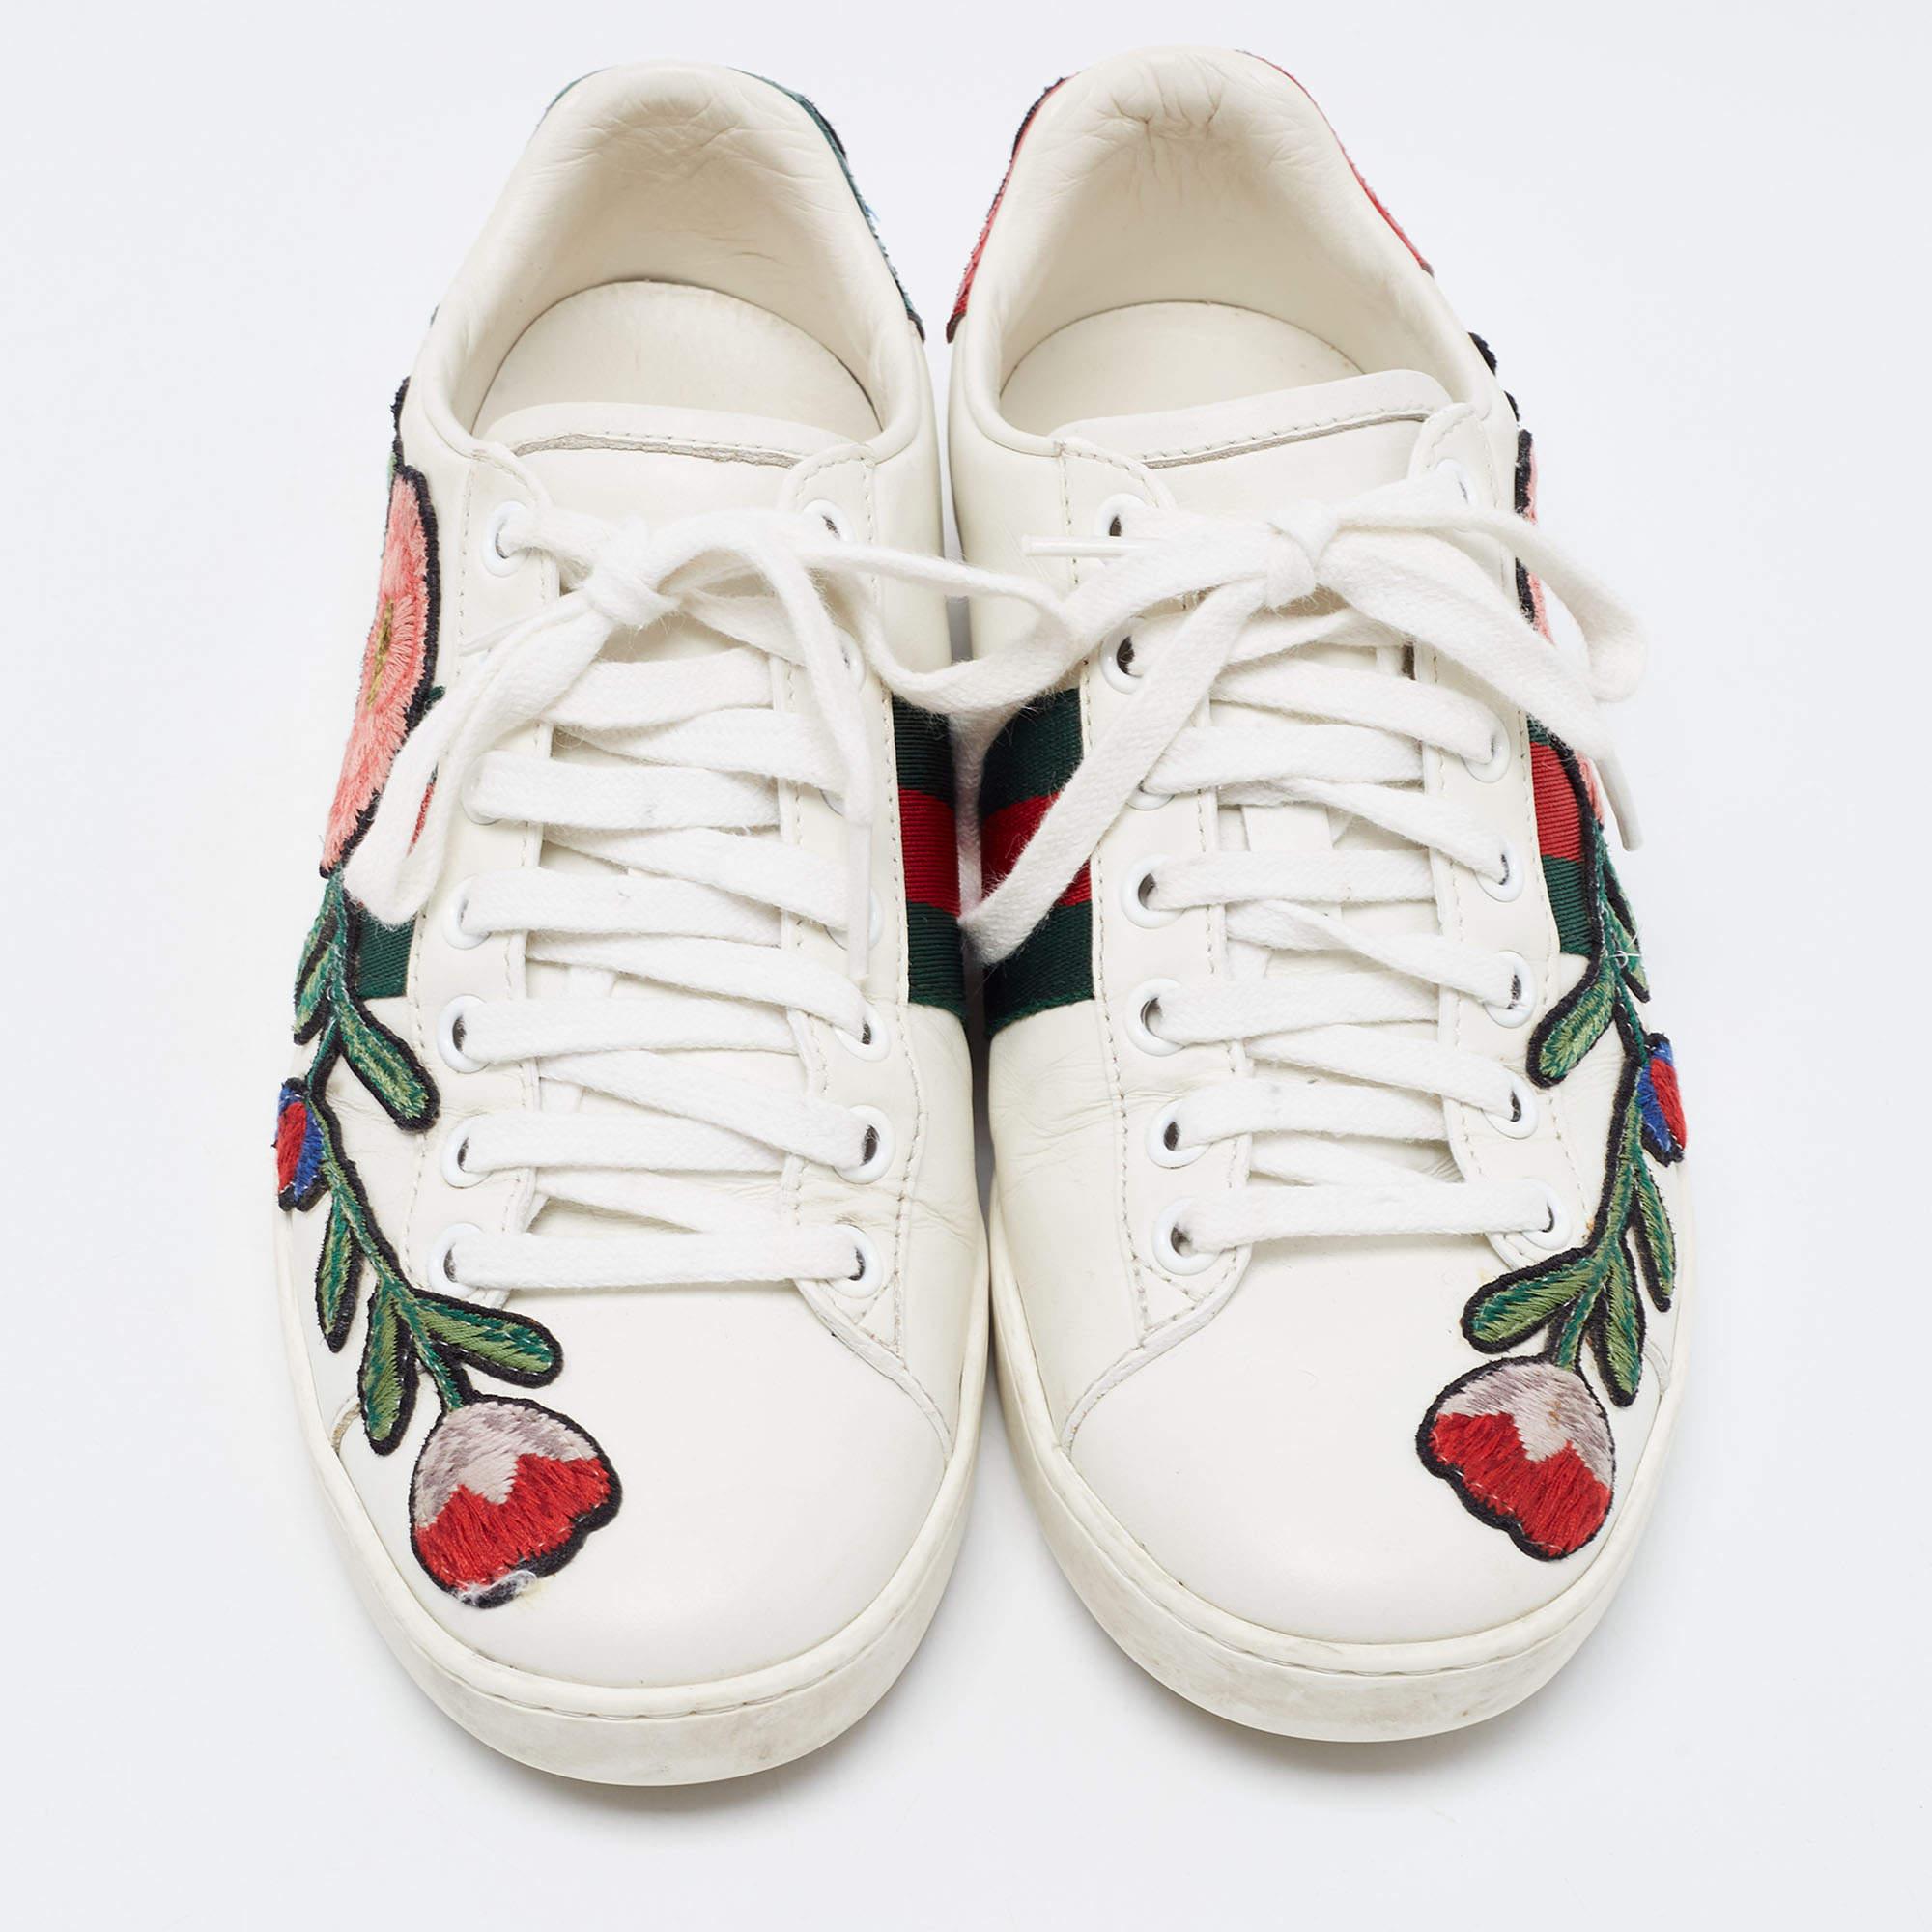 Women's Gucci White Leather Embroidered Floral Ace Sneakers Size 34.5